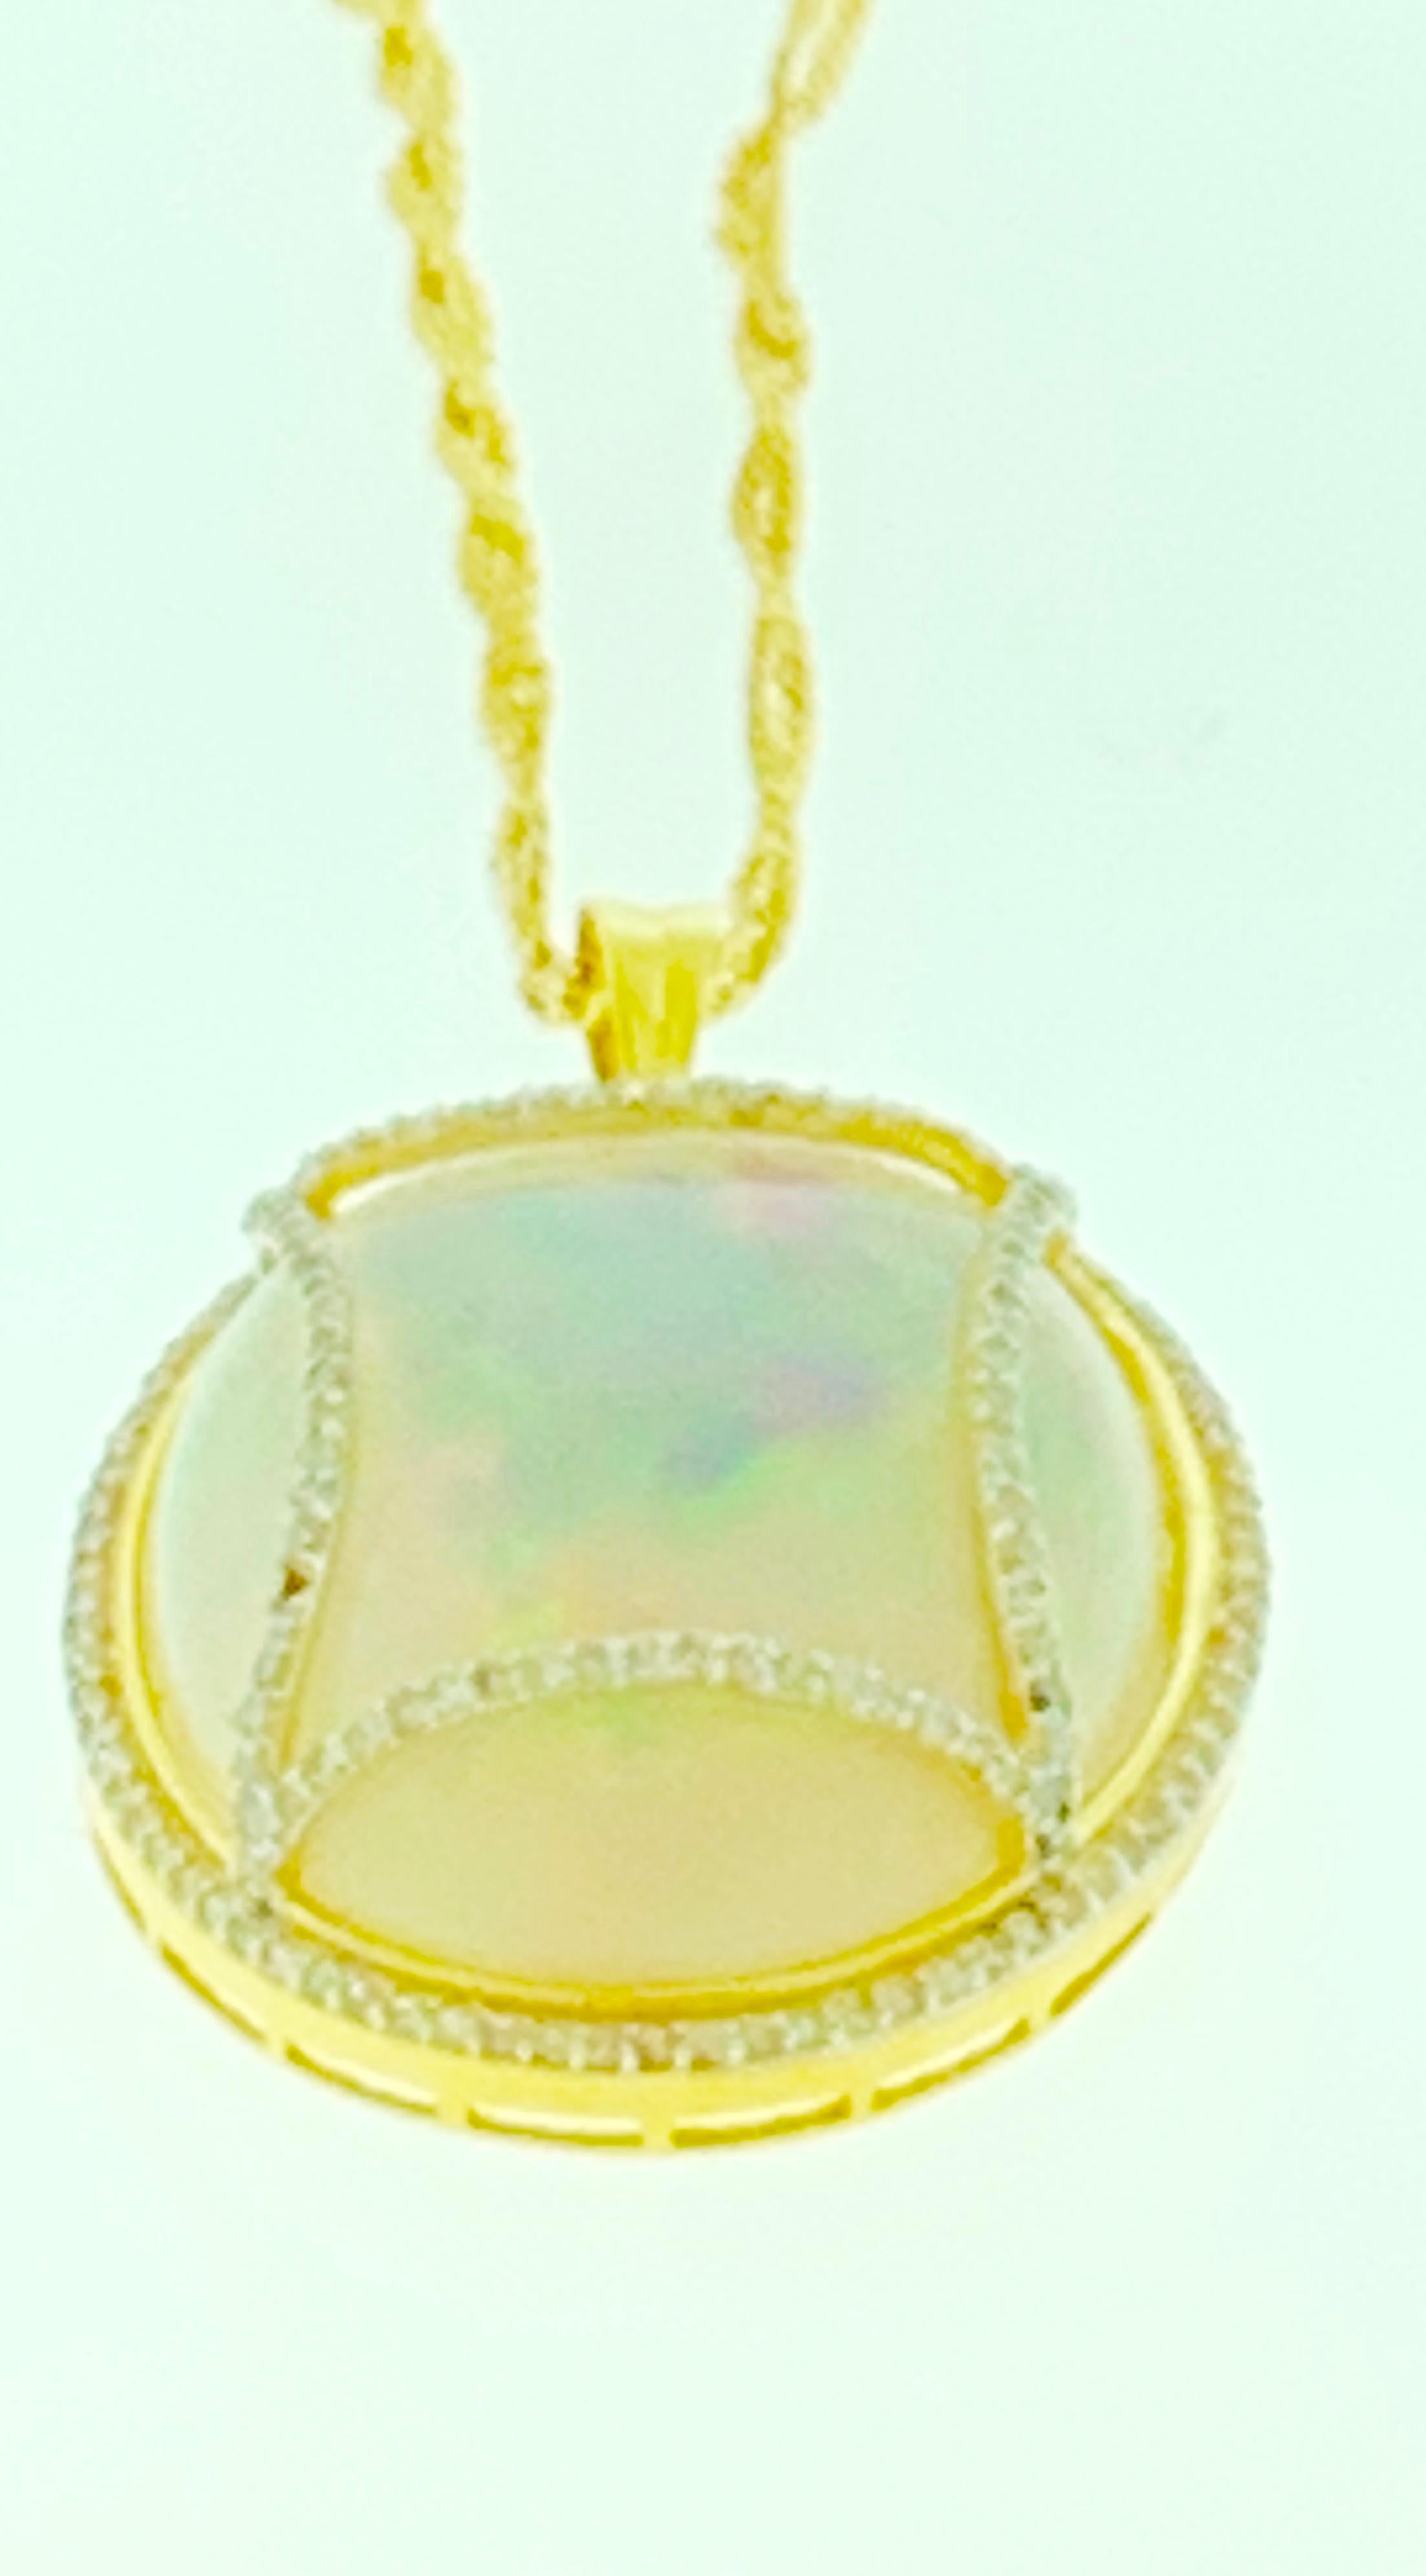 70 Carat Oval Ethiopian Opal and Diamond Pendant or Necklace 14 Karat Gold In Excellent Condition For Sale In New York, NY